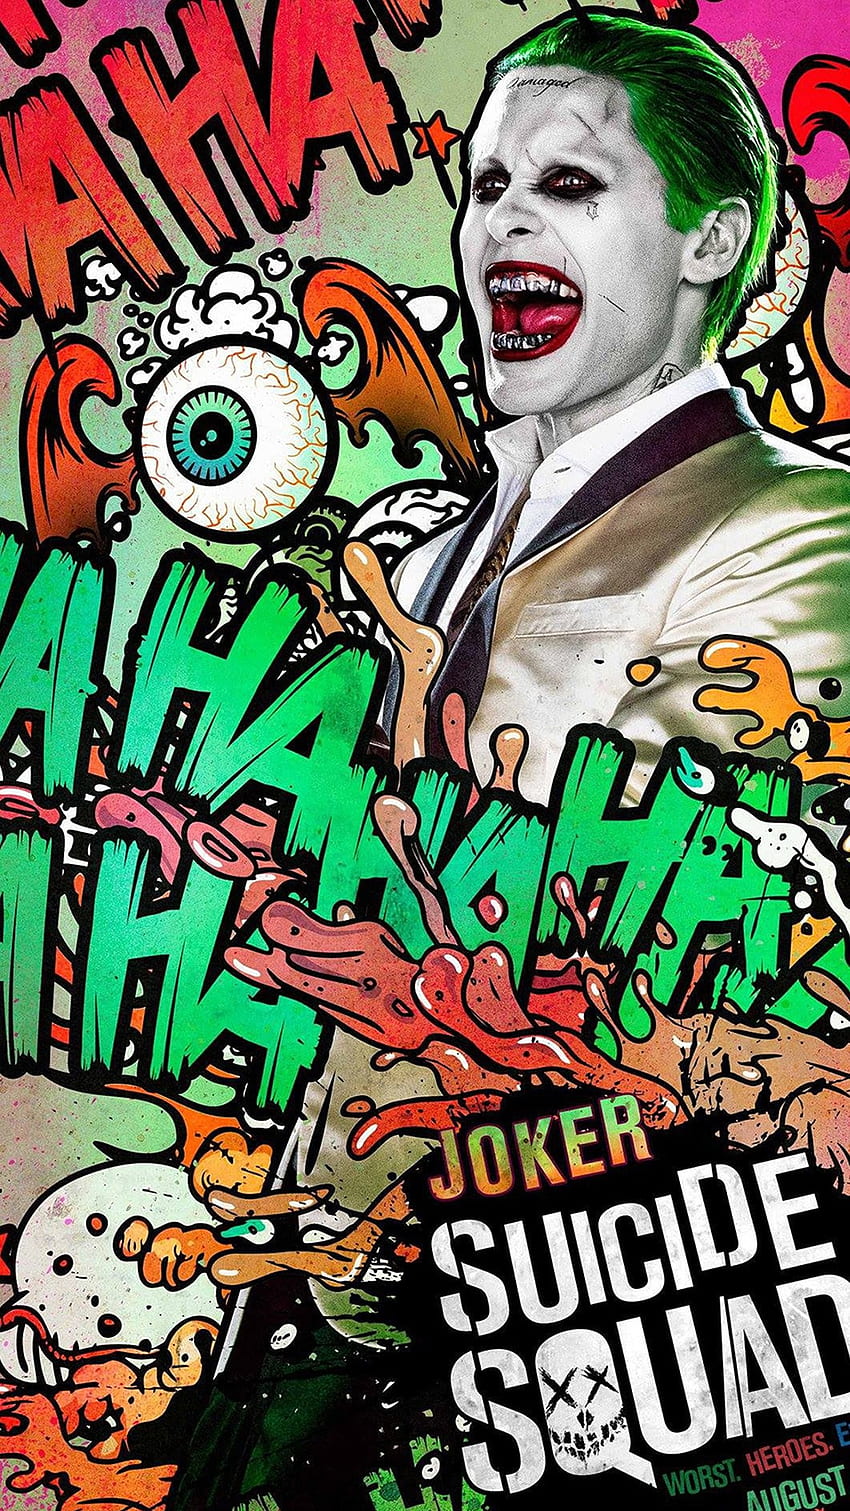 Suicide Squad Joker, Cool Suicide Squad iPhone HD phone wallpaper